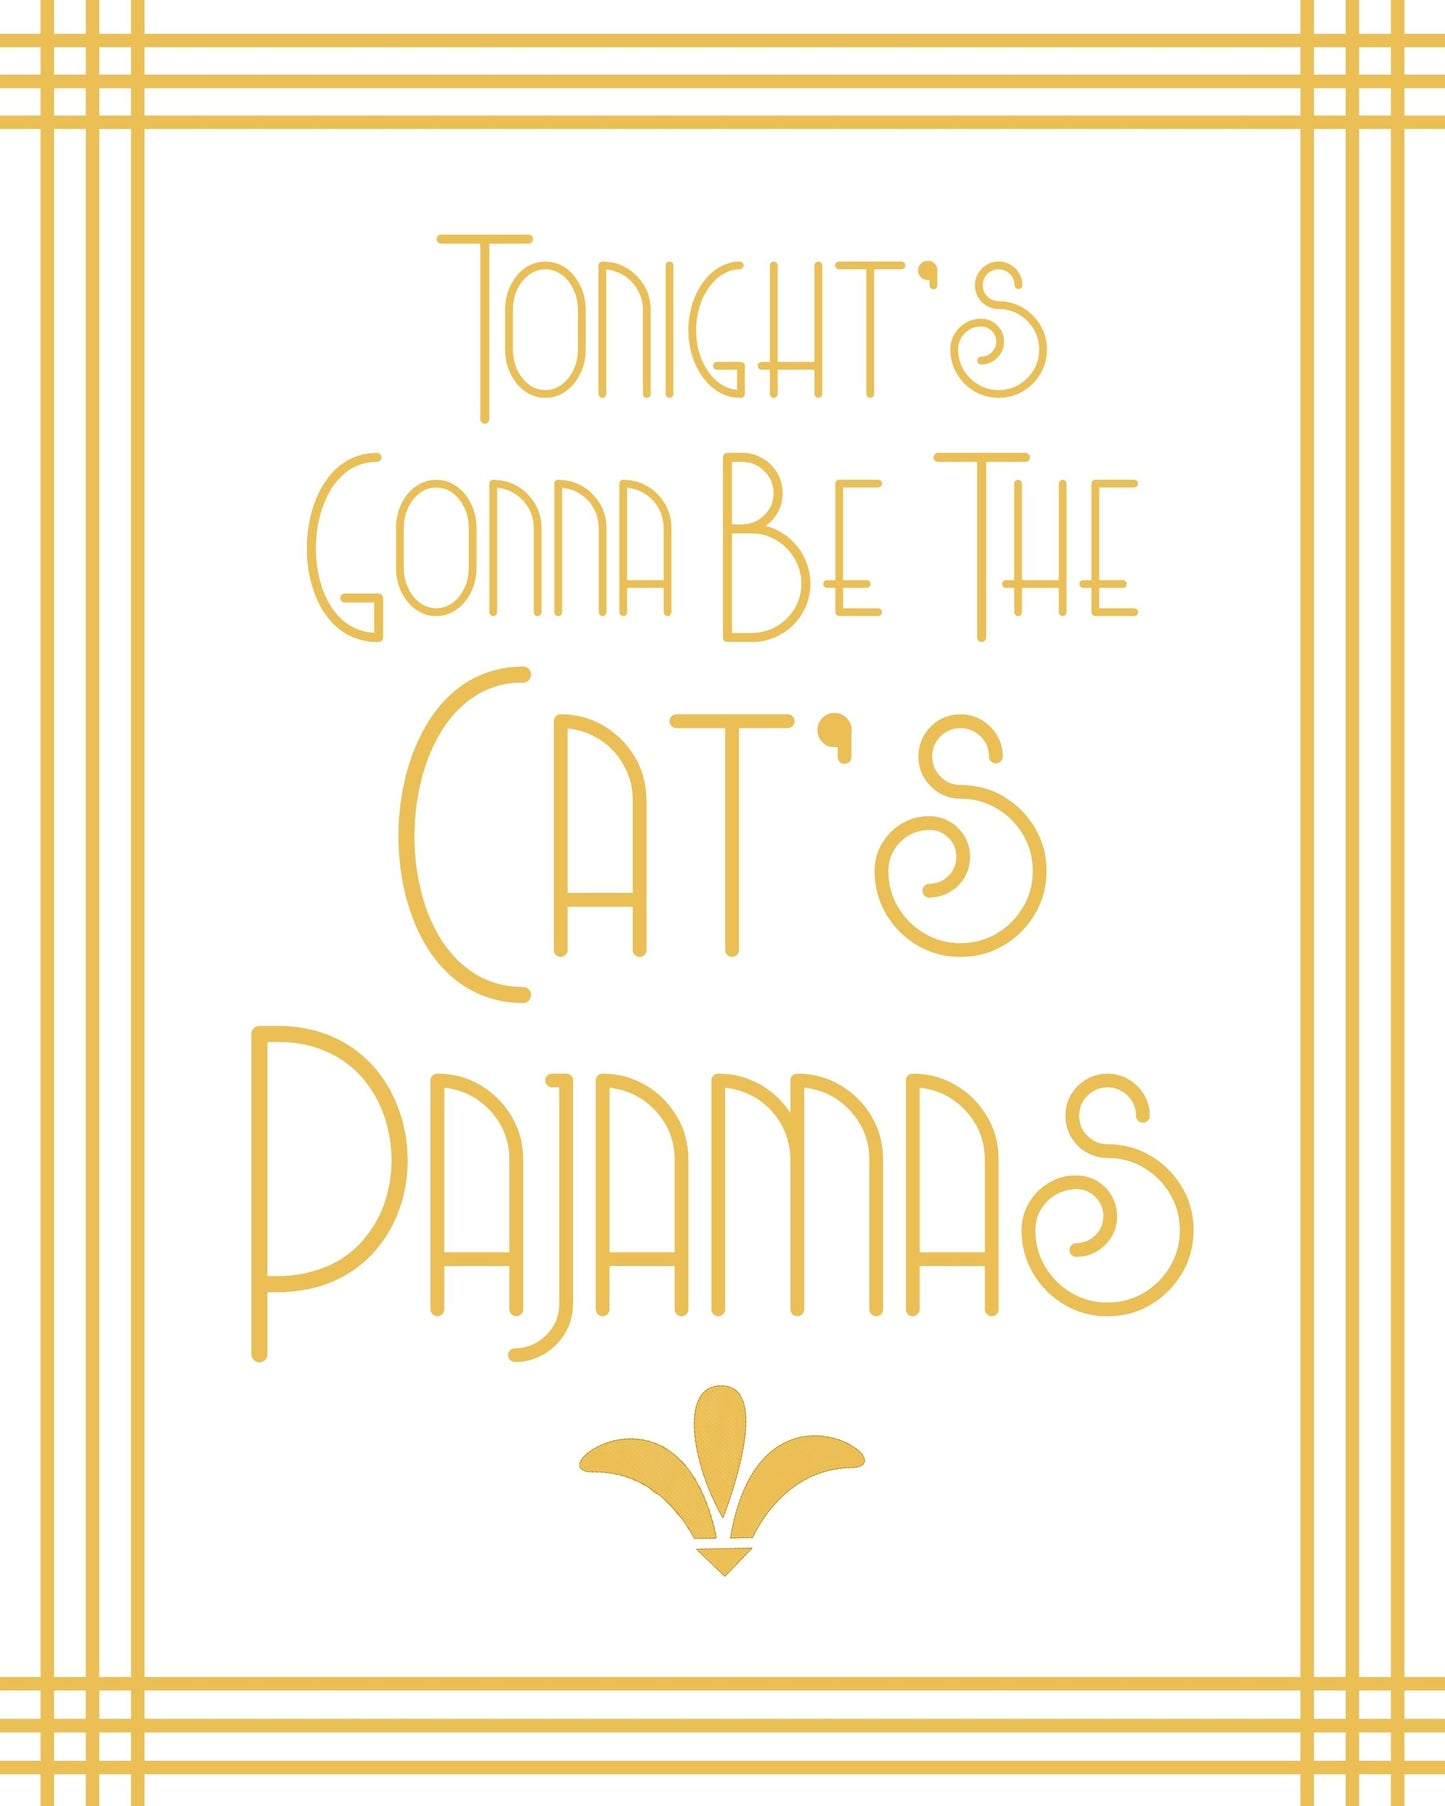 "Tonight's Gonna Be The Cat's Pajamas" Printable Party Sign For Great Gatsby or Roaring 20's Party Or Wedding, White & Gold, Printable Party Decor